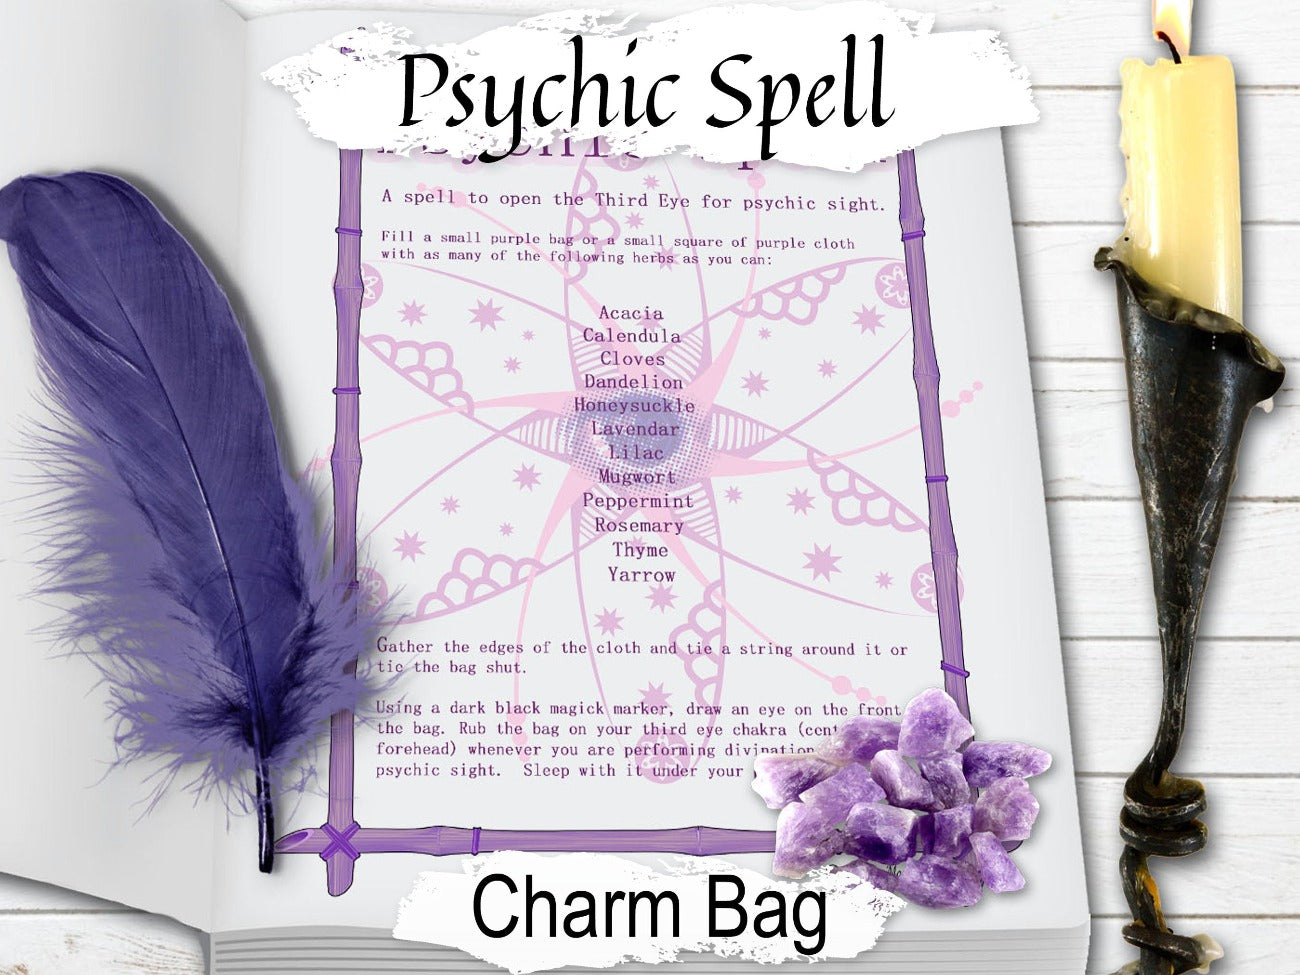 PSYCHIC SPELL, How To Open your Third Eye, Wicca Clairvoyant Magic, Telepathy Charm Bag Spell, Wicca Witchcraft Subconscious Mind Opening - Morgana Magick Spell